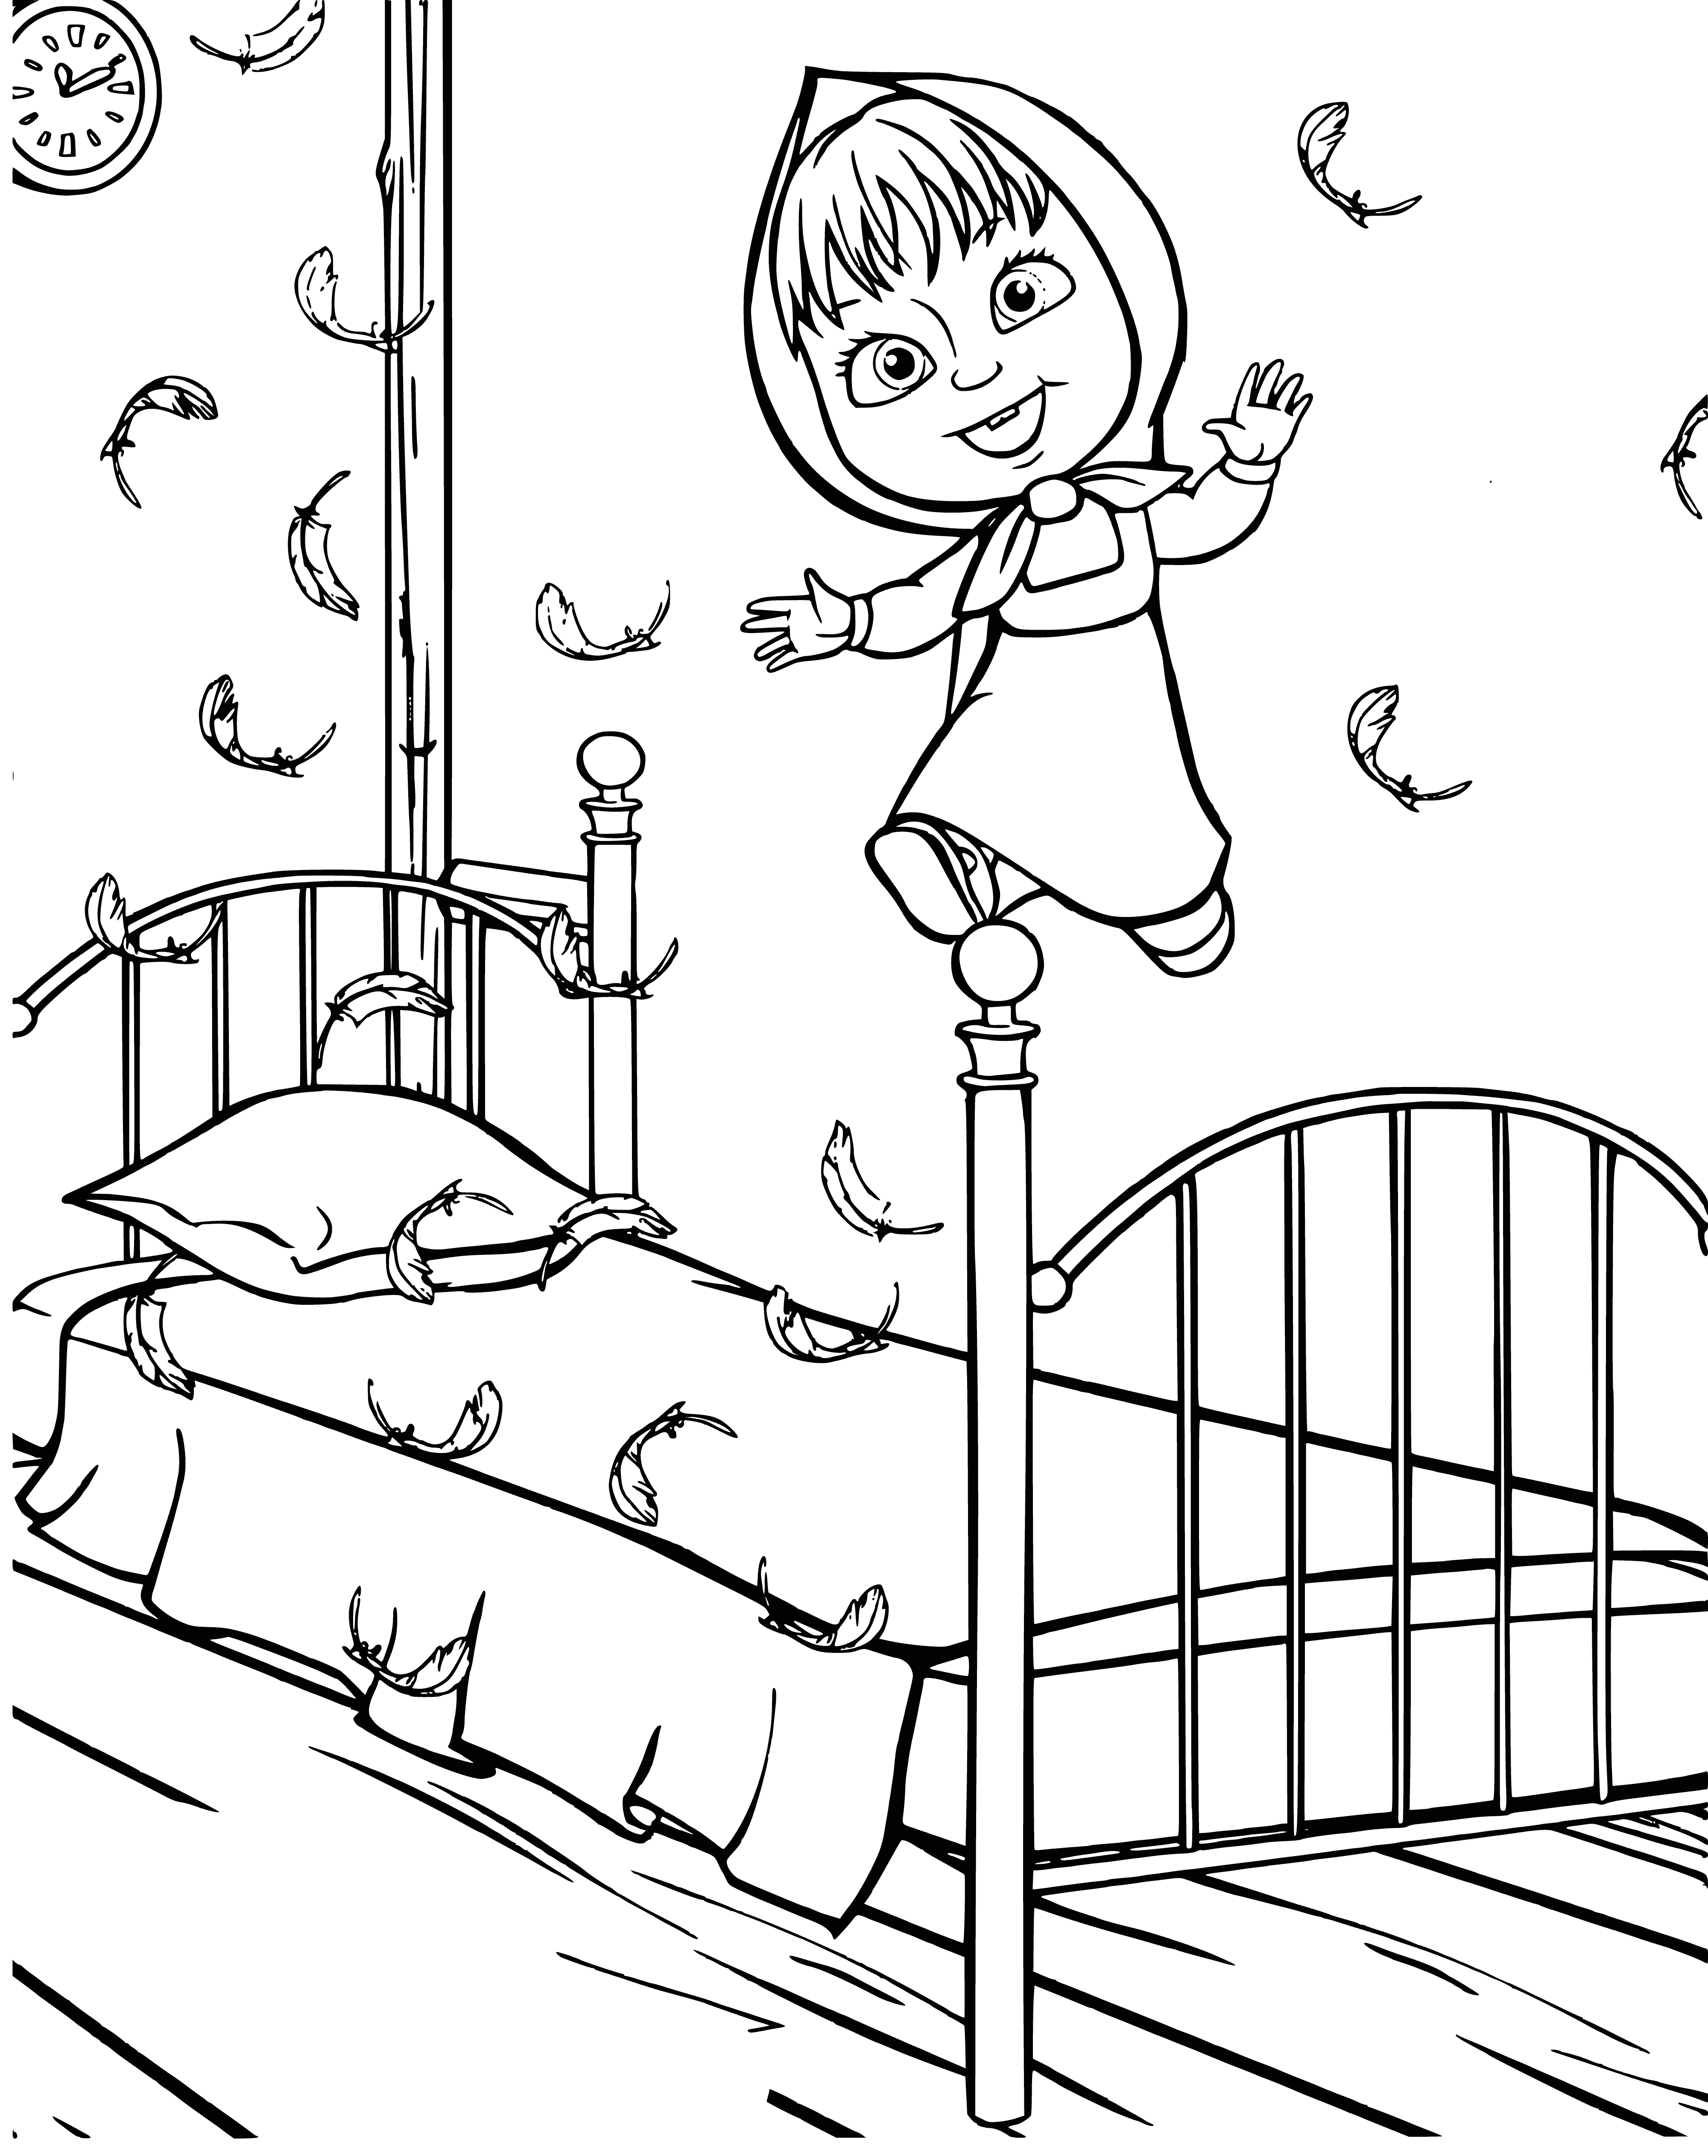 coloring page: Masha is a dark-haired girl smiling while standing on a bed next to a big brown bear with a big smile.